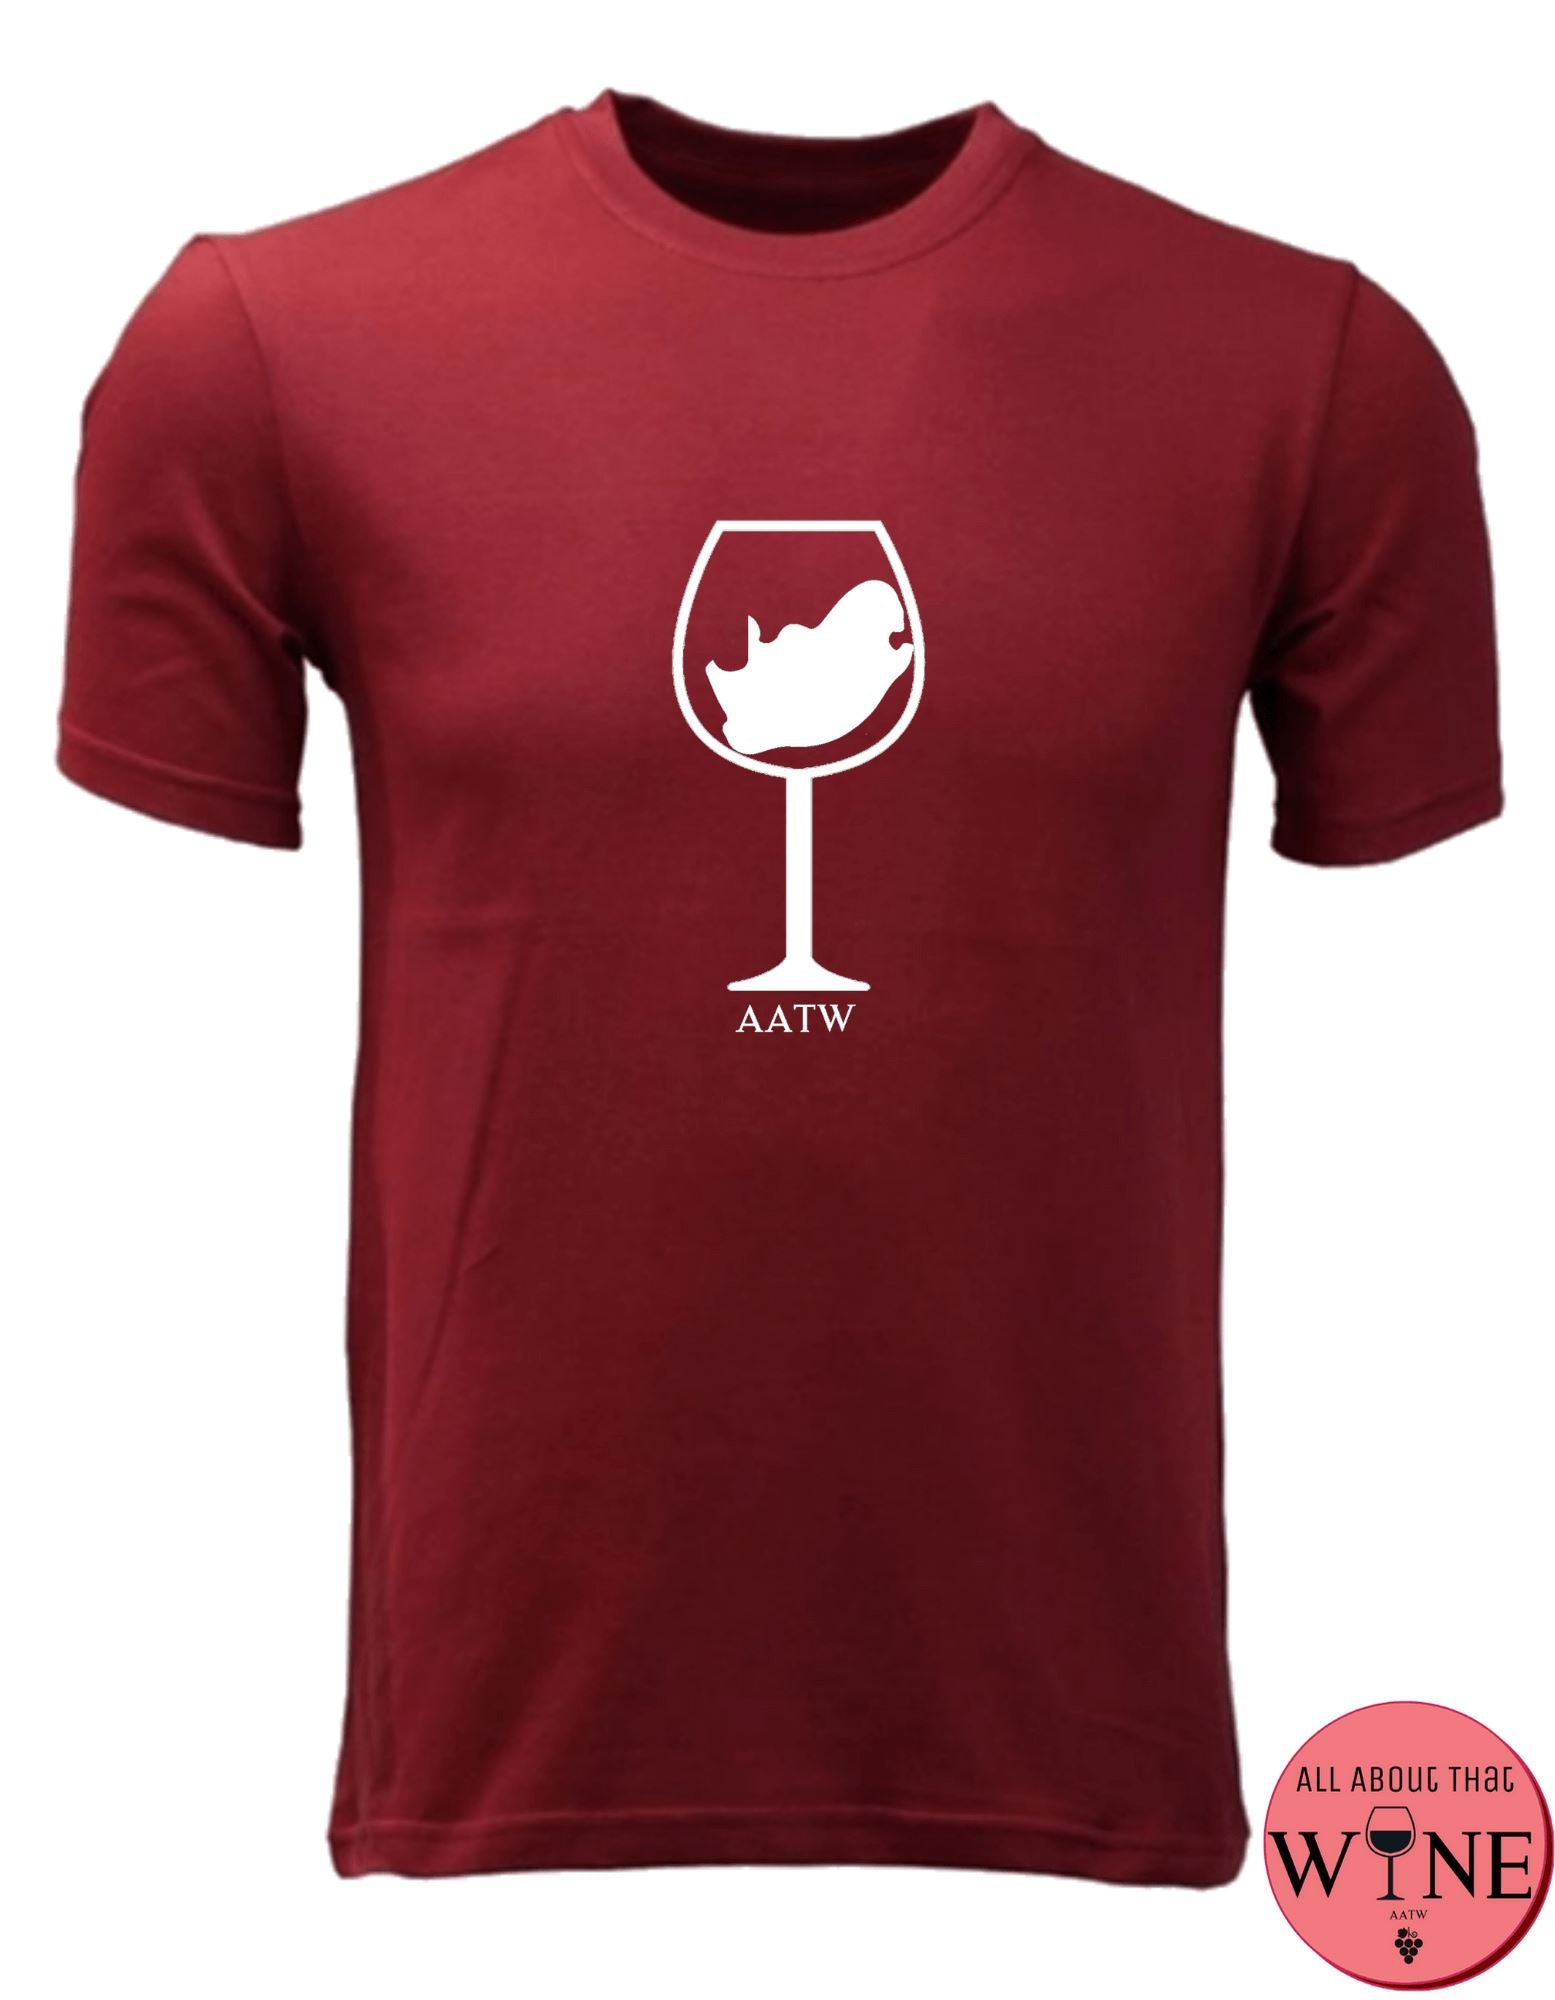 SA Wine Glass - Unisex/Male S Deep red with white